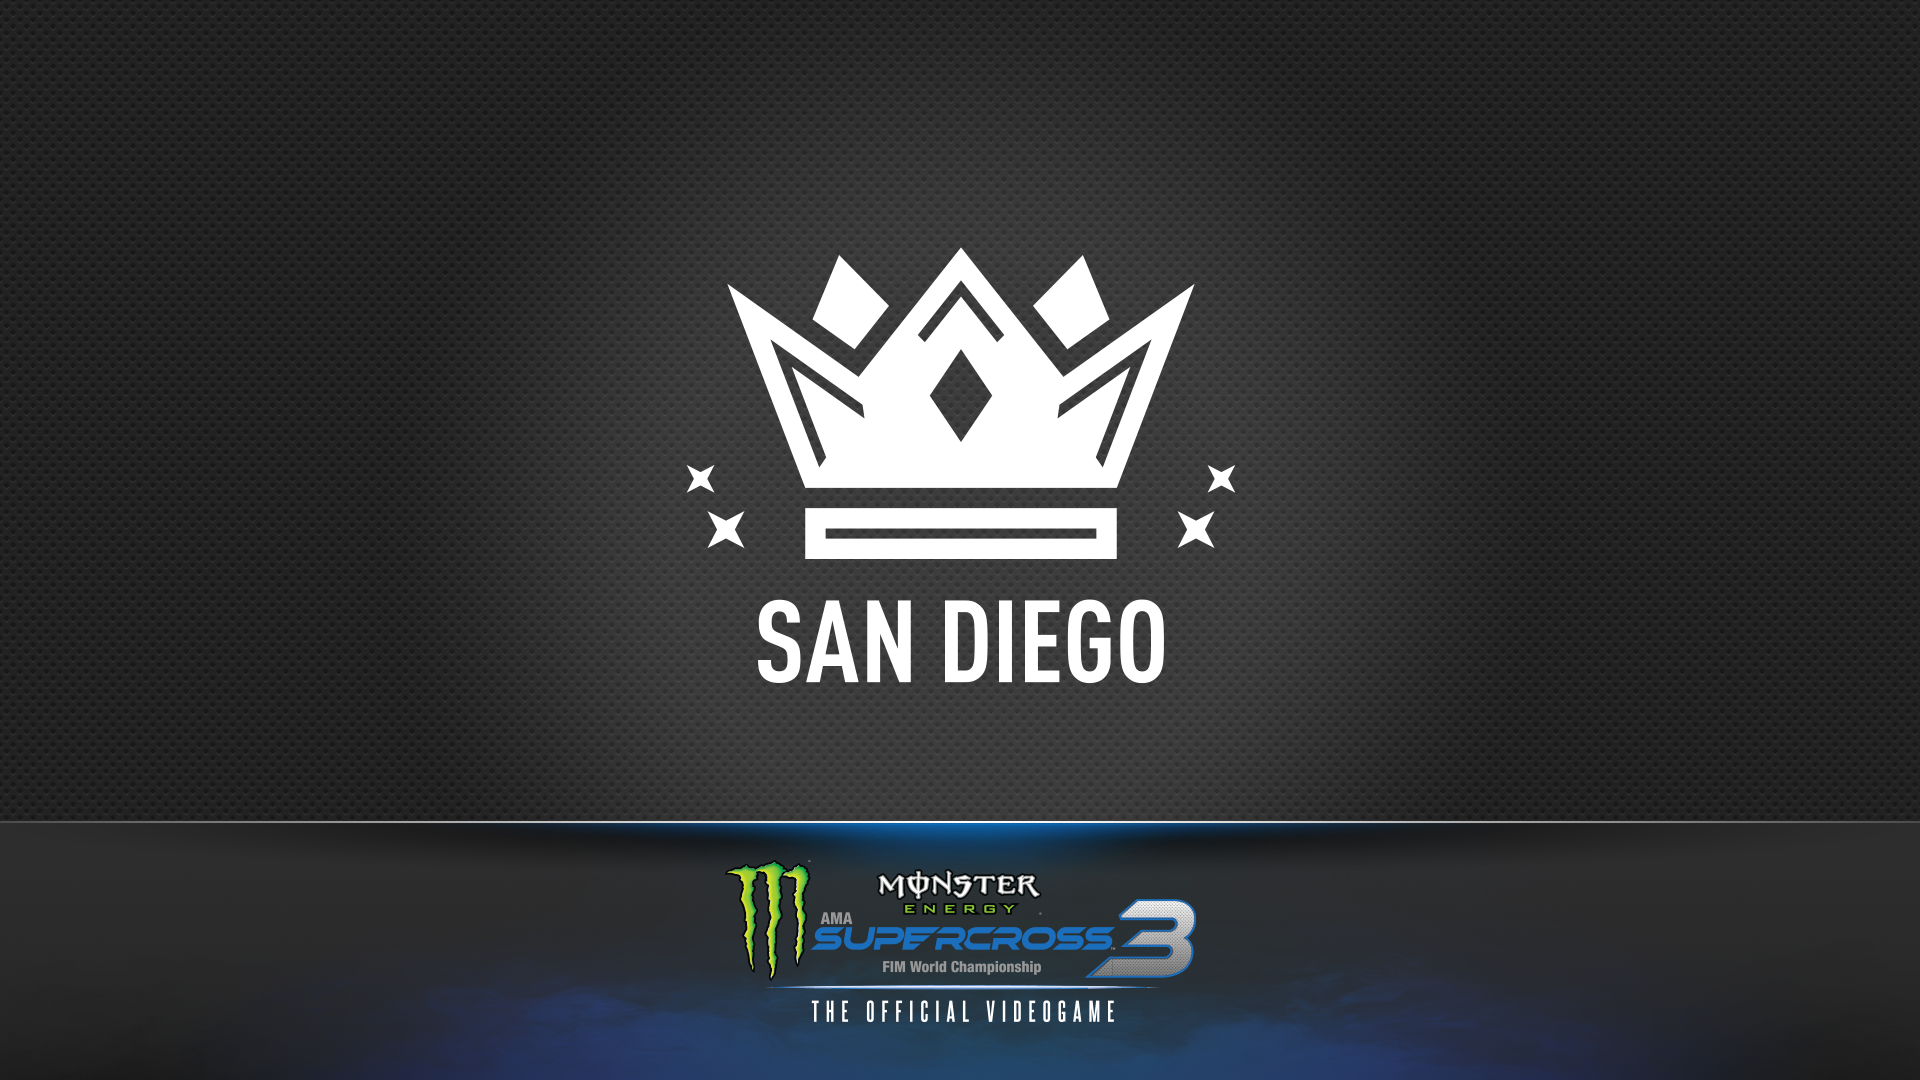 Icon for King of San Diego